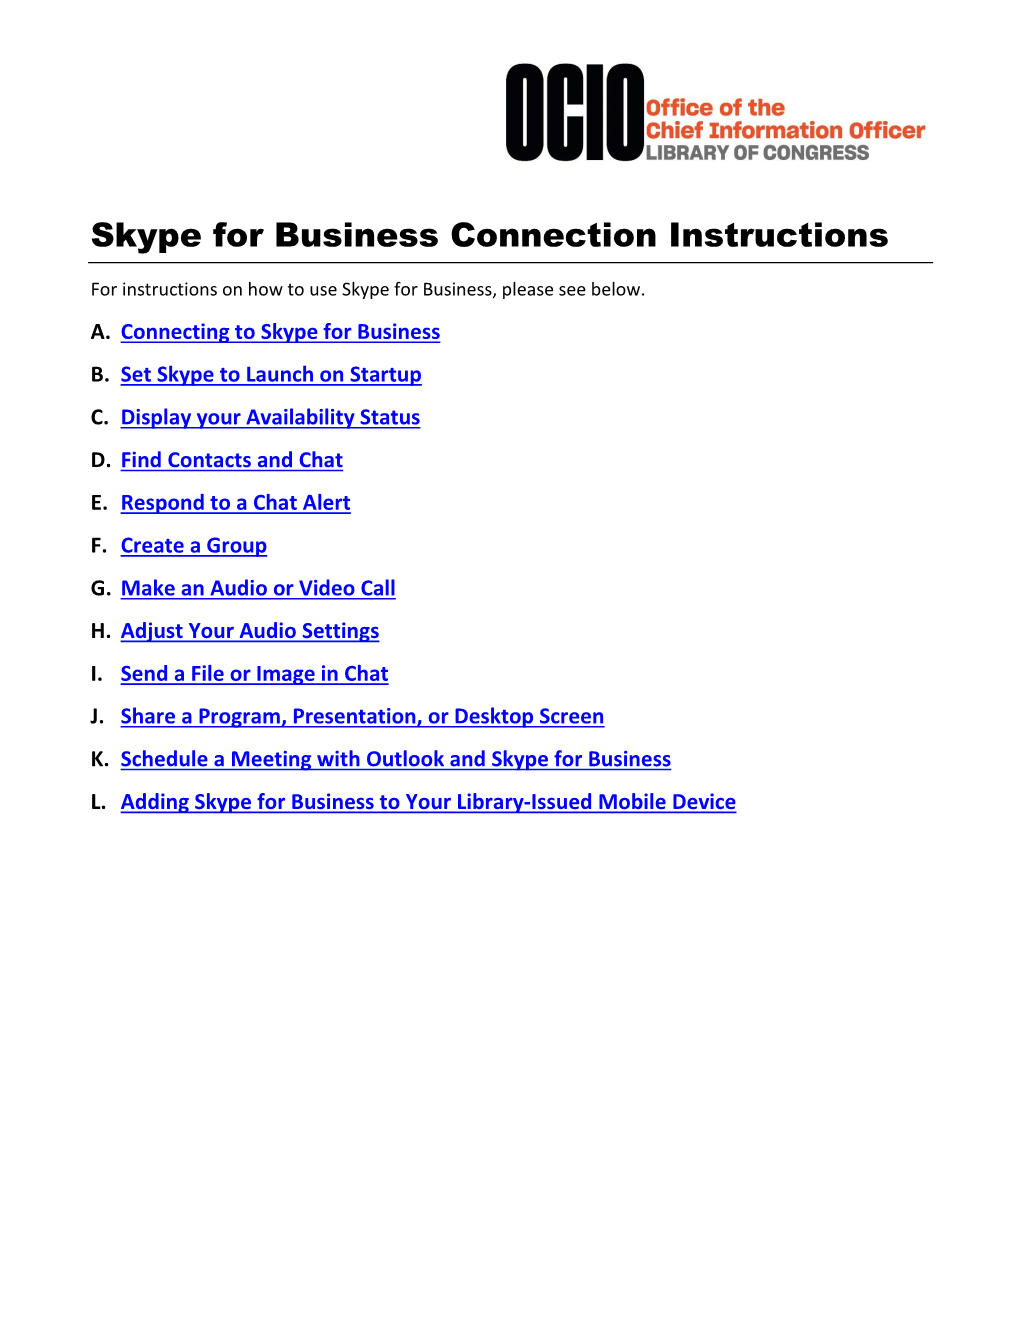 Skype for Business Connection Instructions